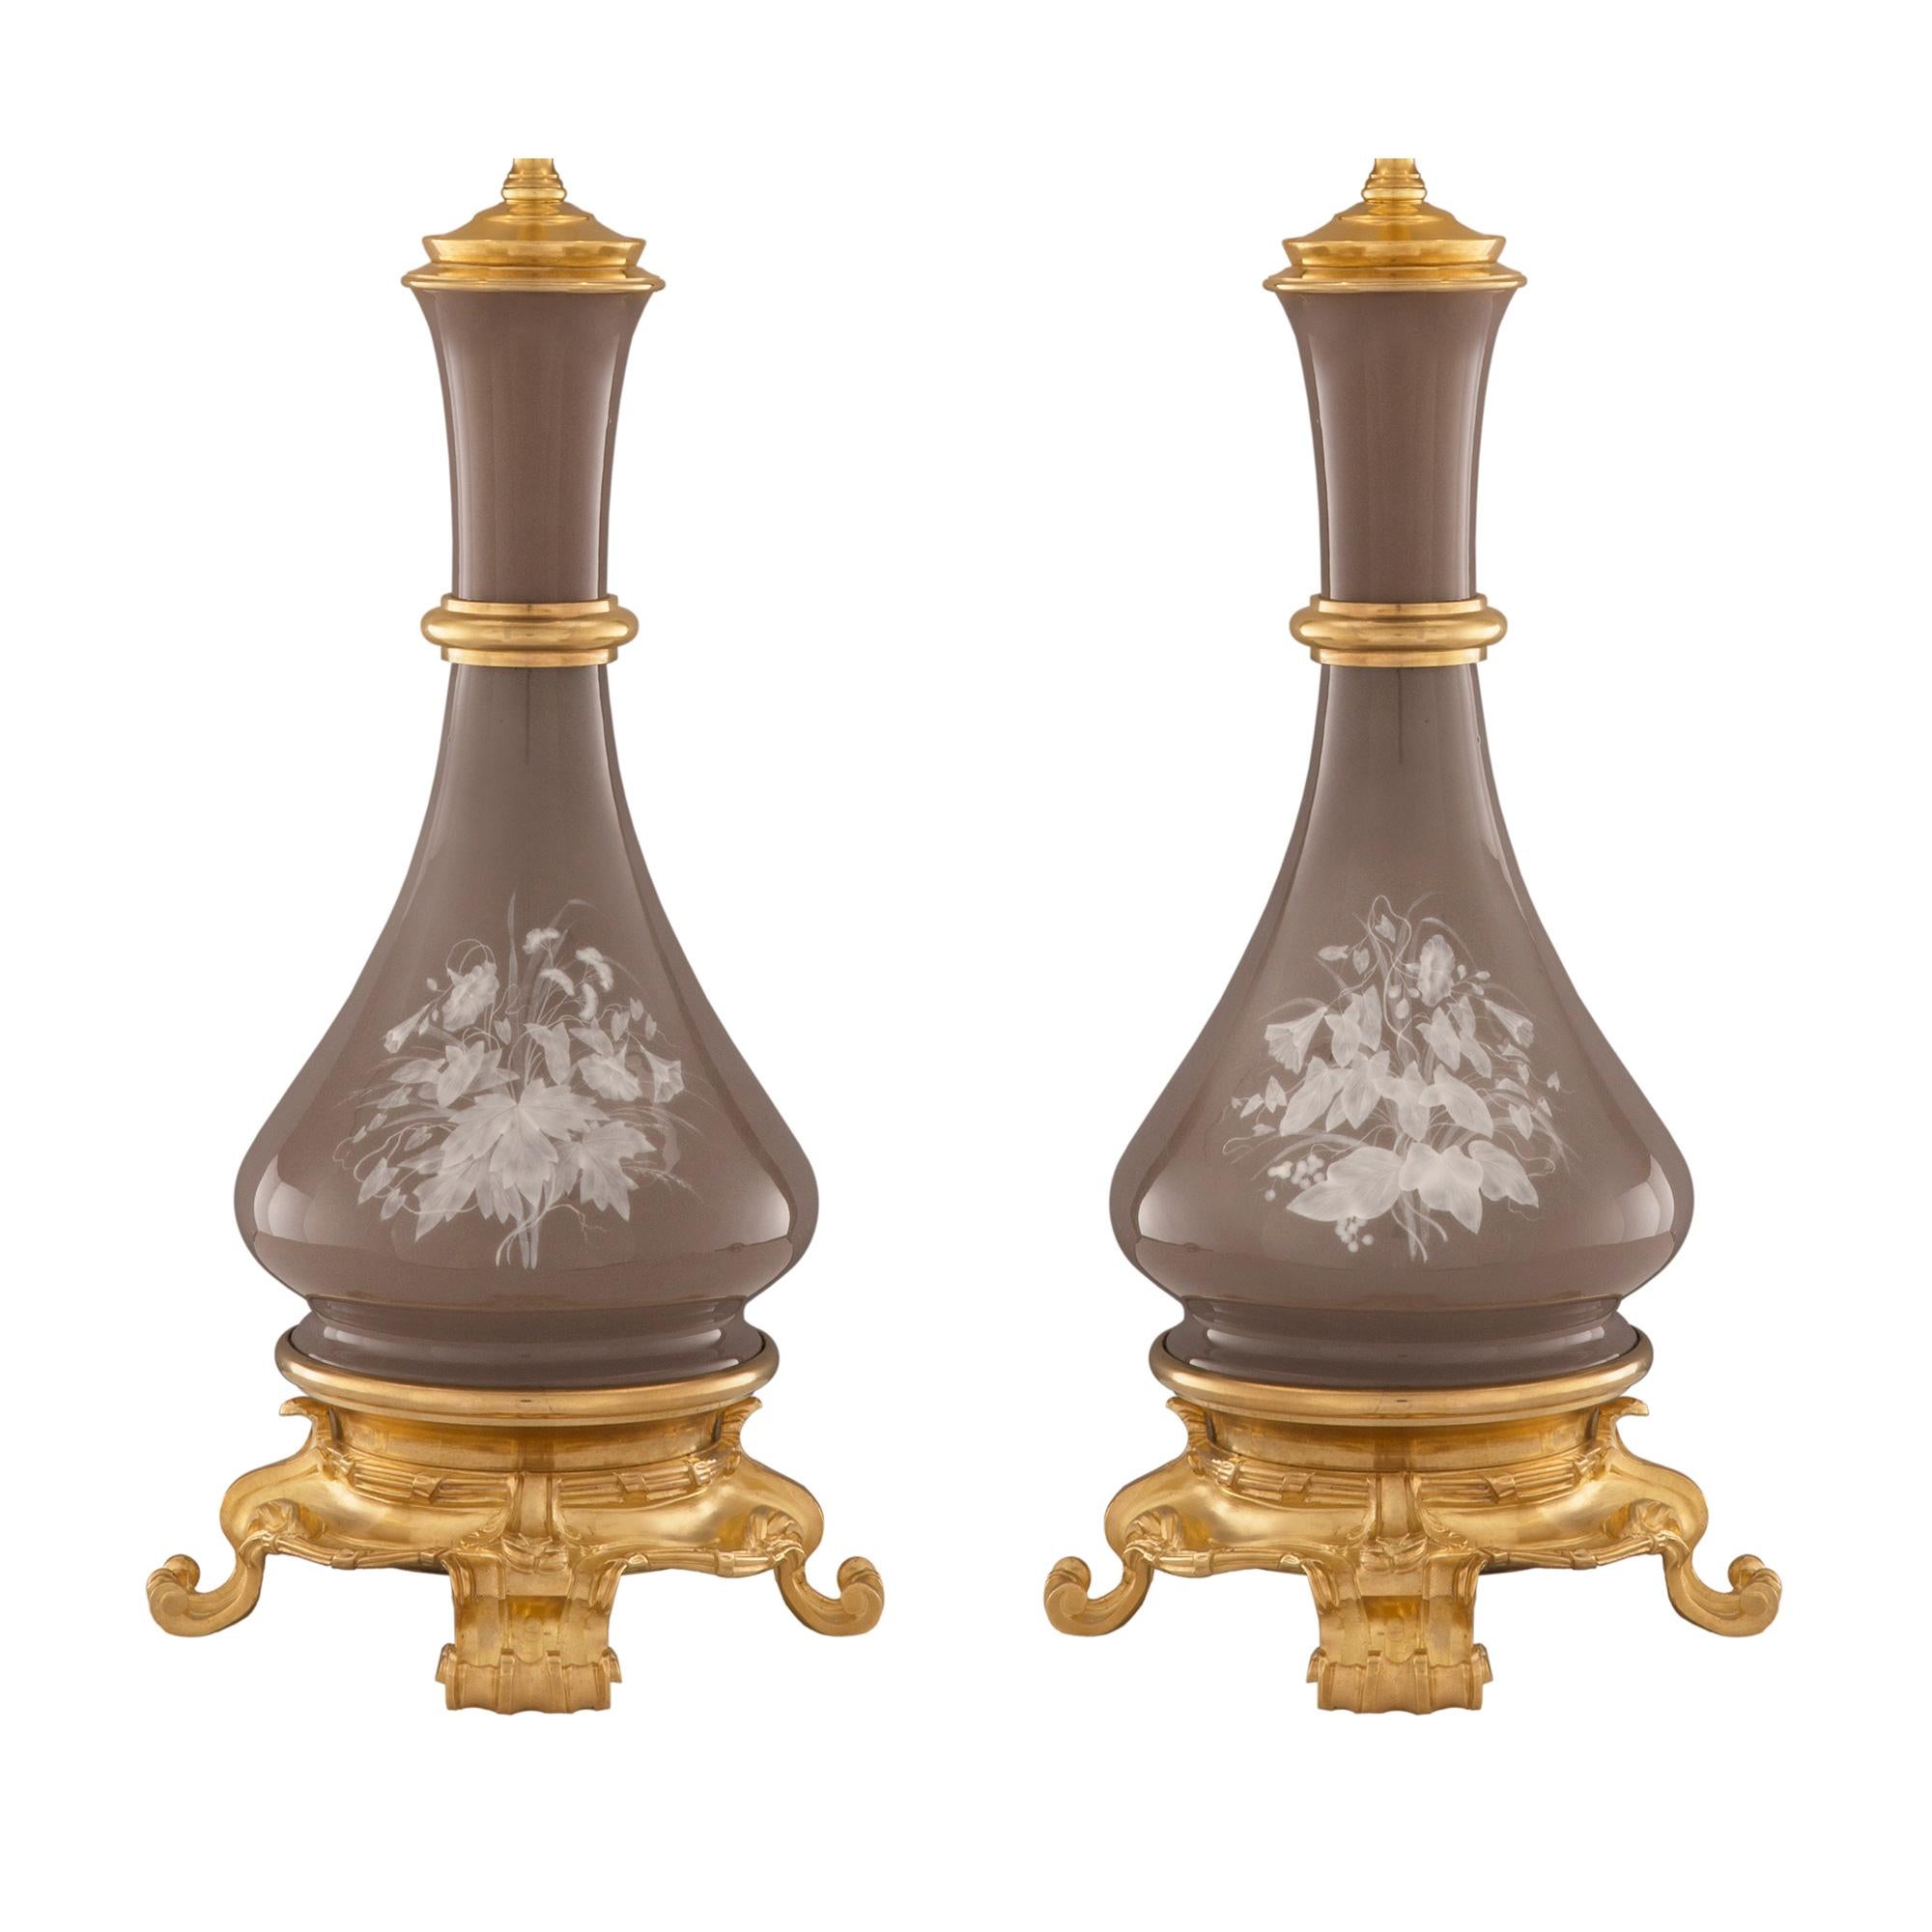 A most elegant pair of French 19th century Louis XVI st. porcelain and ormolu Pâte sur Pâte lamps. Each lamp is raised by a fine ormolu base with most decorative scrolled foliate feet and a lovely hammered design. Above the base are tied fluted